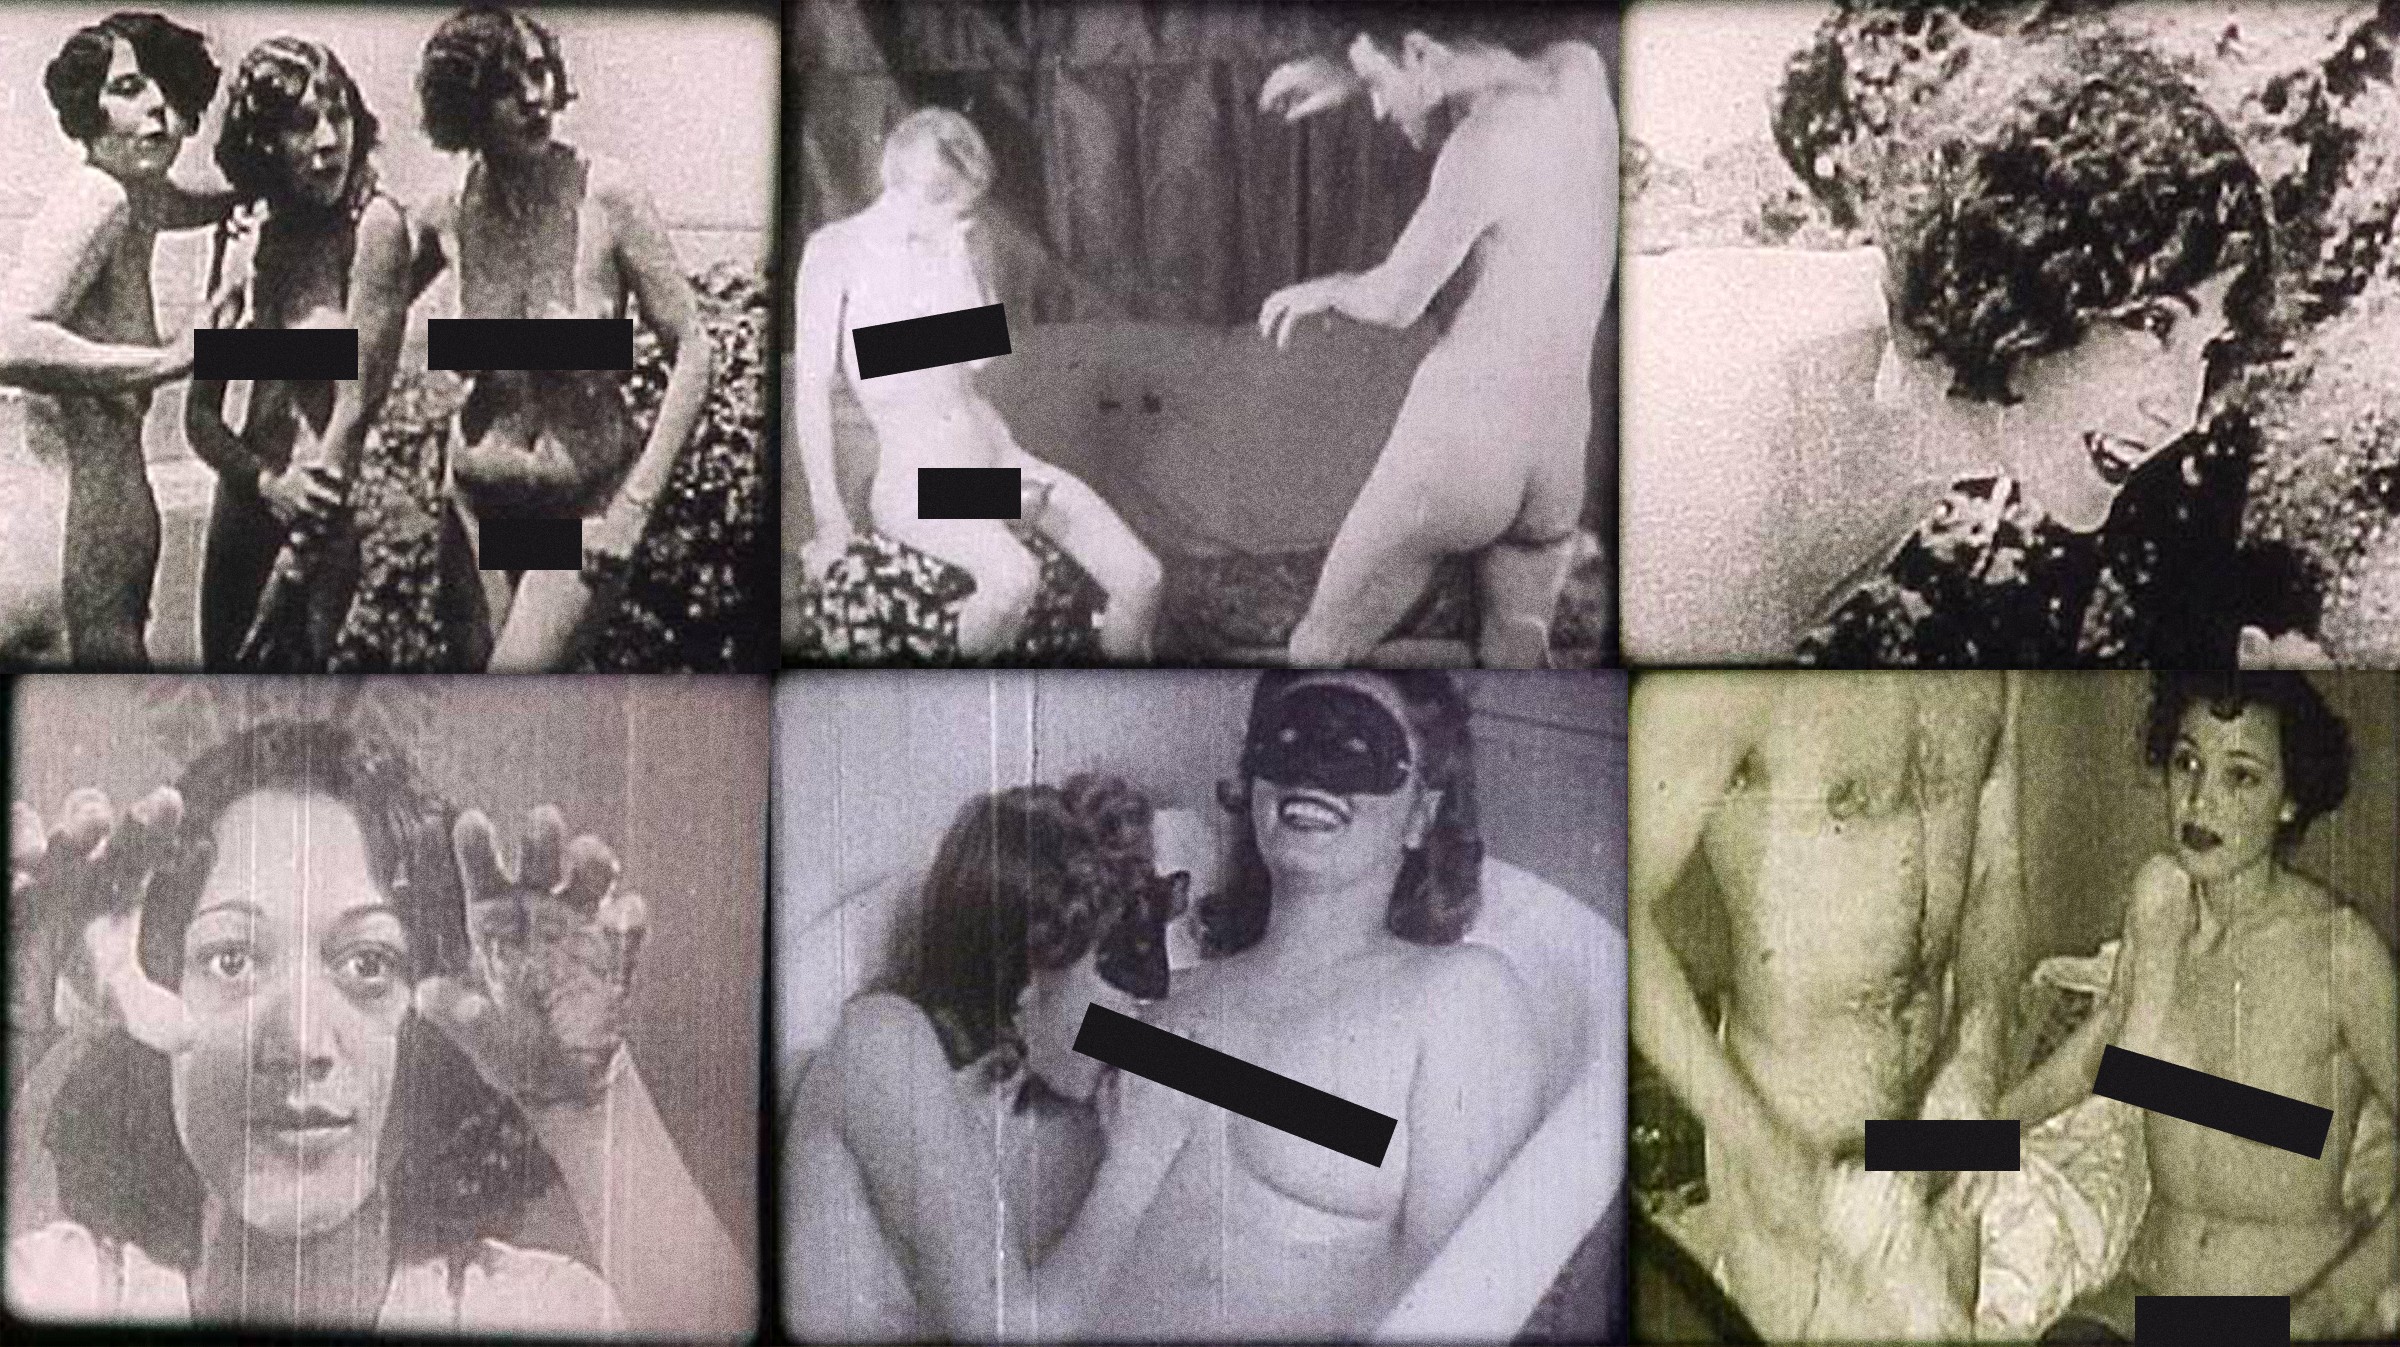 1920s Hardcore Porn - Porn from the 1920s Was More Wild and Hardcore Than You Could Imagine